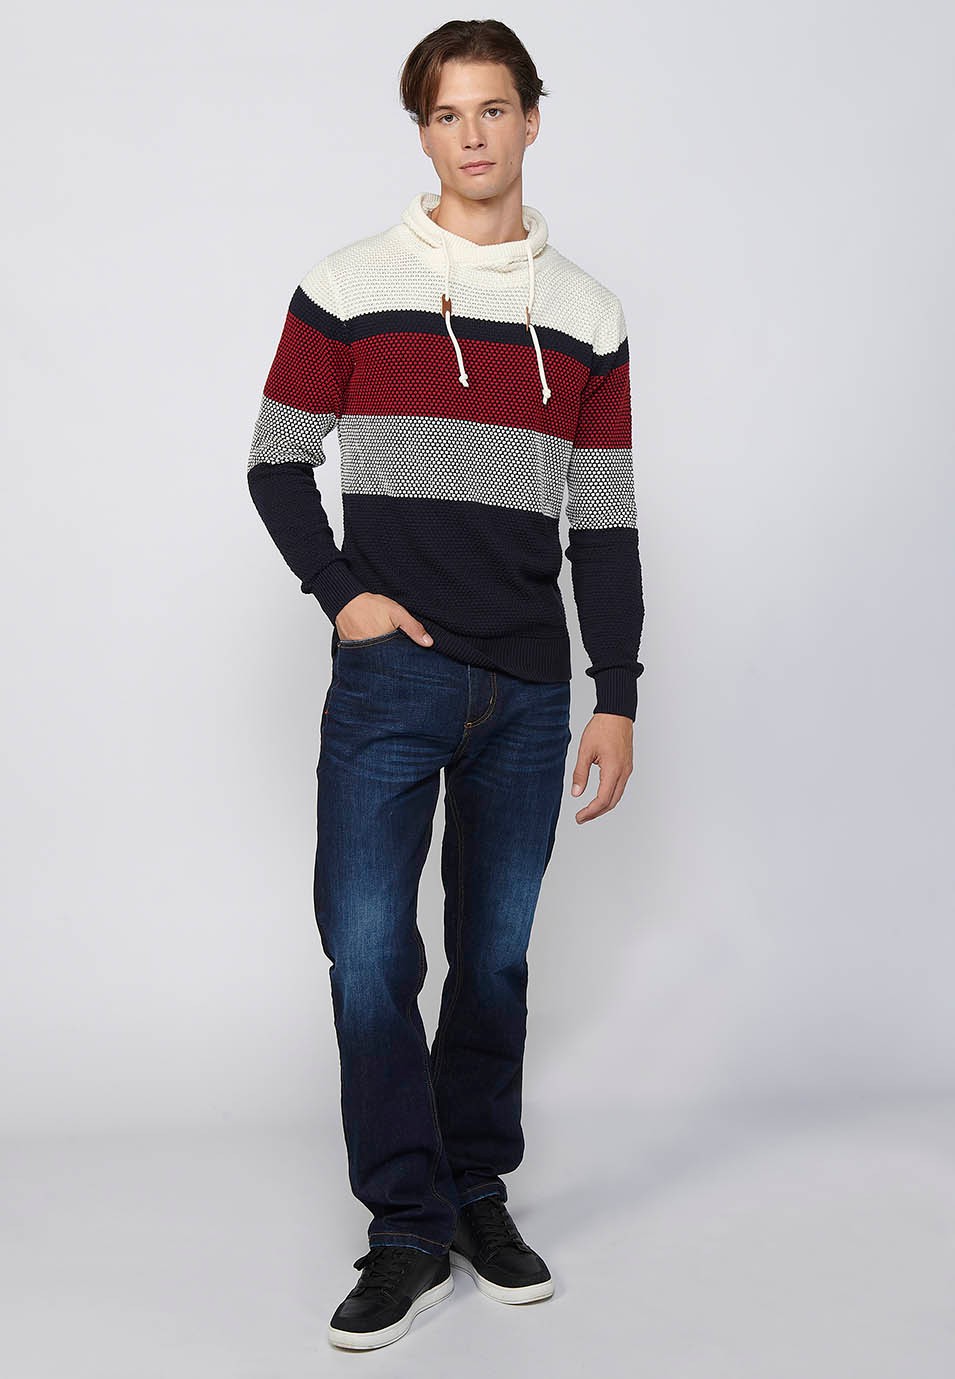 Long-sleeved sweater with adjustable turtleneck with drawstring, navy cotton textured striped tricot for men 1